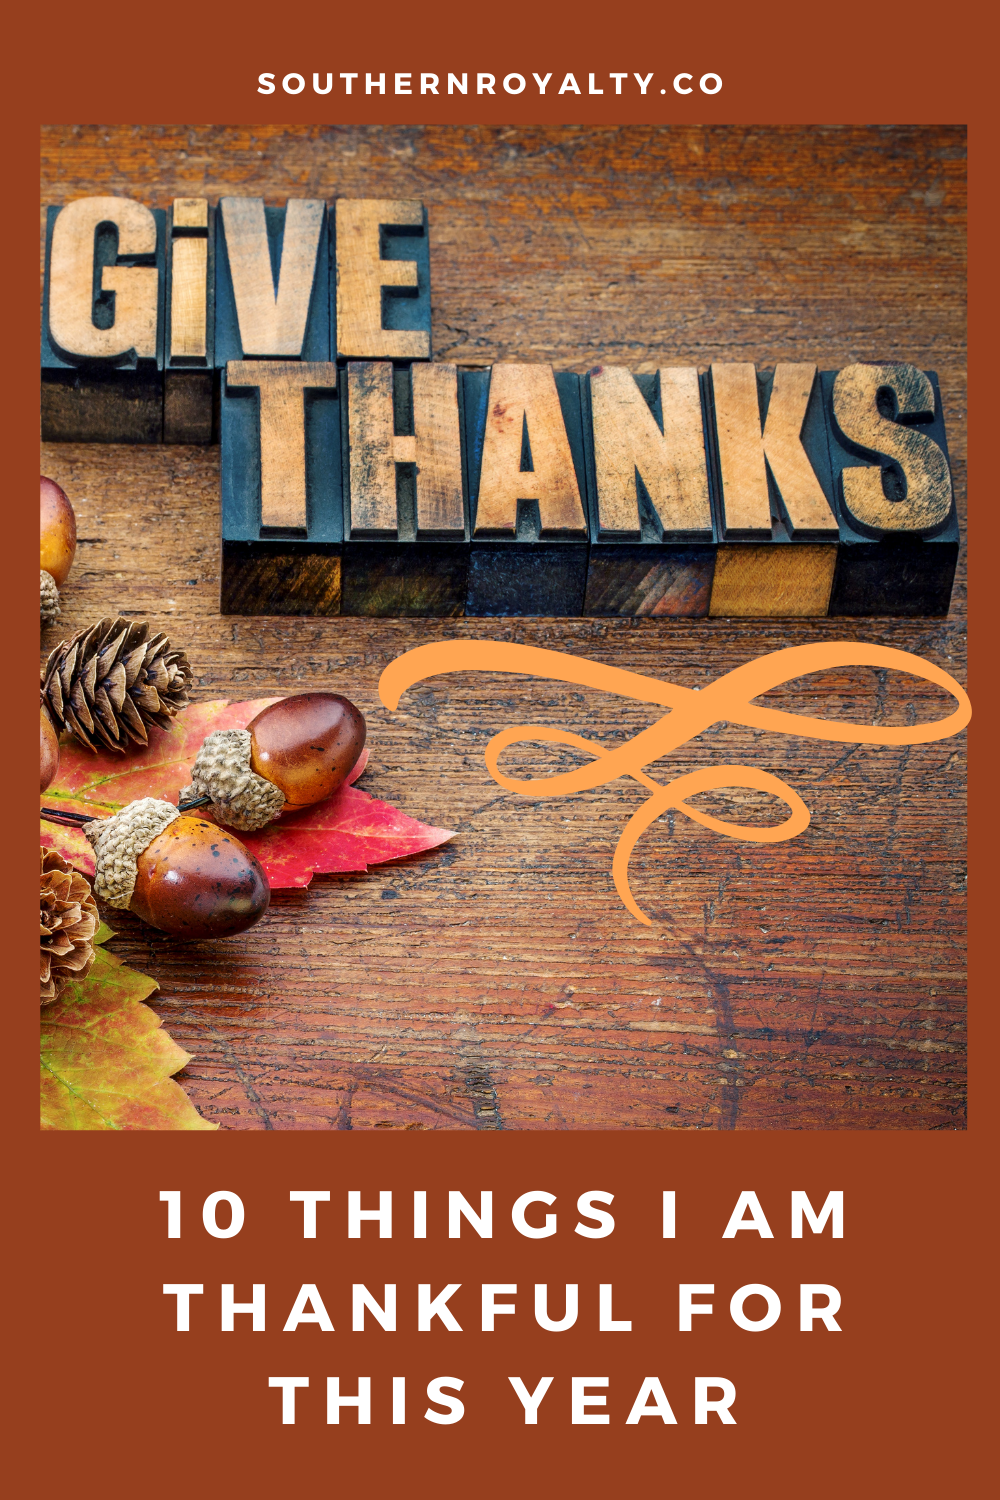 10 Things I am thankful for this year